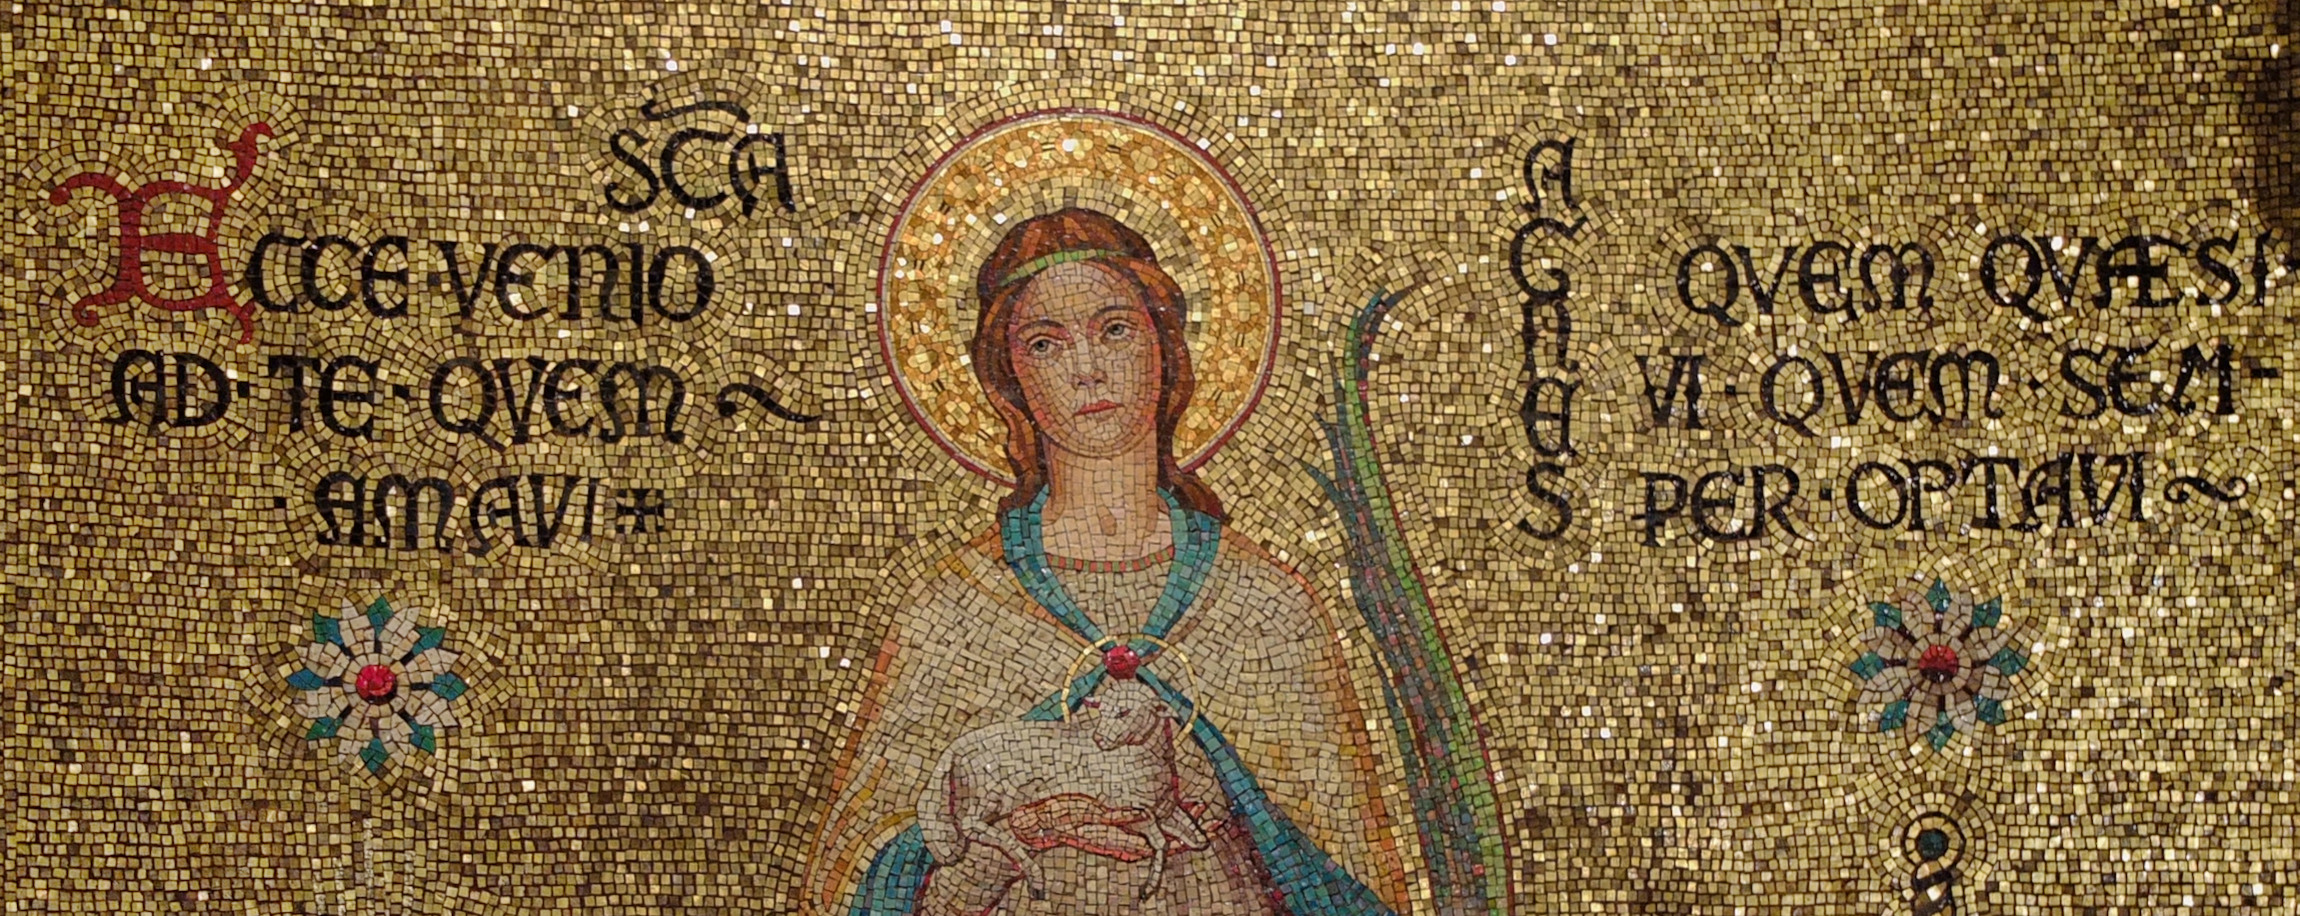 mosaic of St. Agnes in the crypt of the National Shrine of the Immaculate Conception